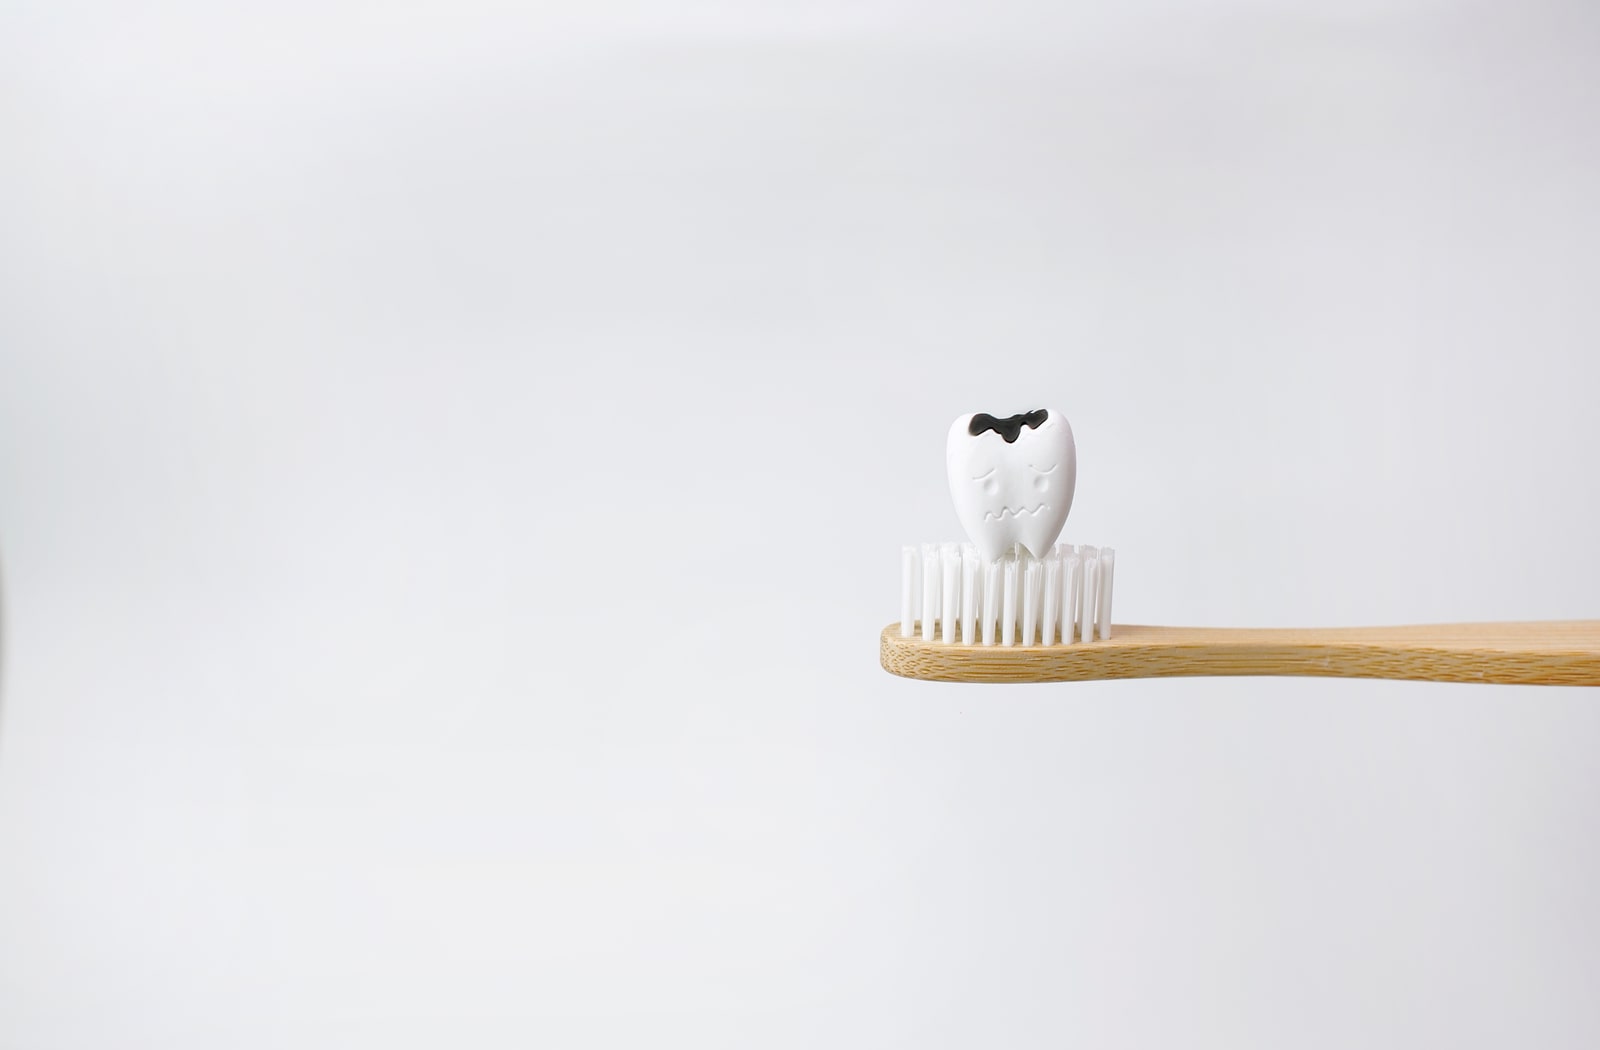 A plastic tooth with a cavity on it, sitting on top of a wooden toothbrush